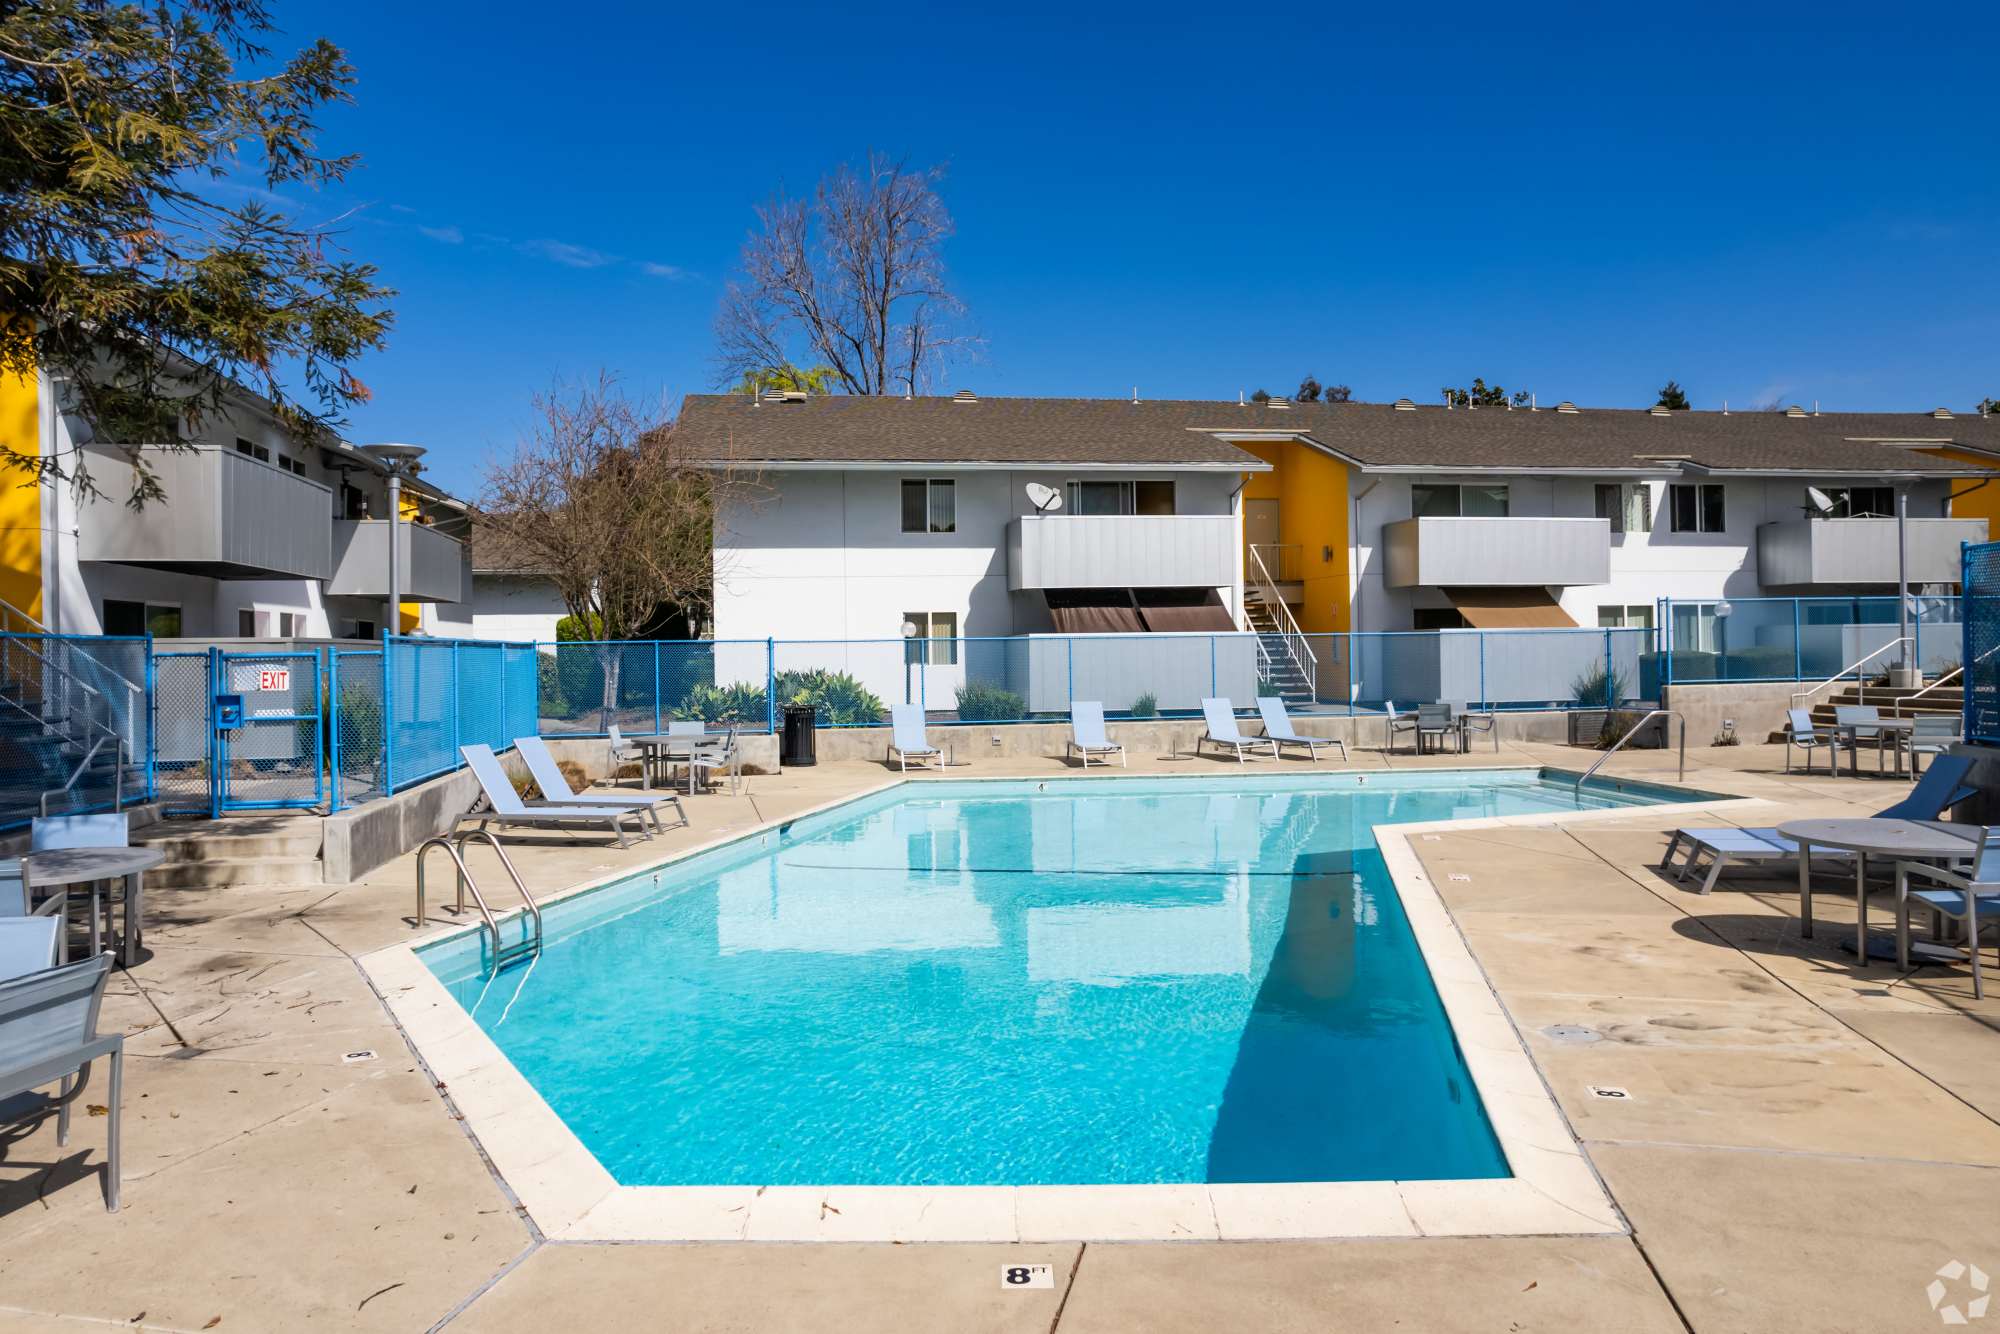 Swimming pool with seating Lakeside Village in San Leandro, California